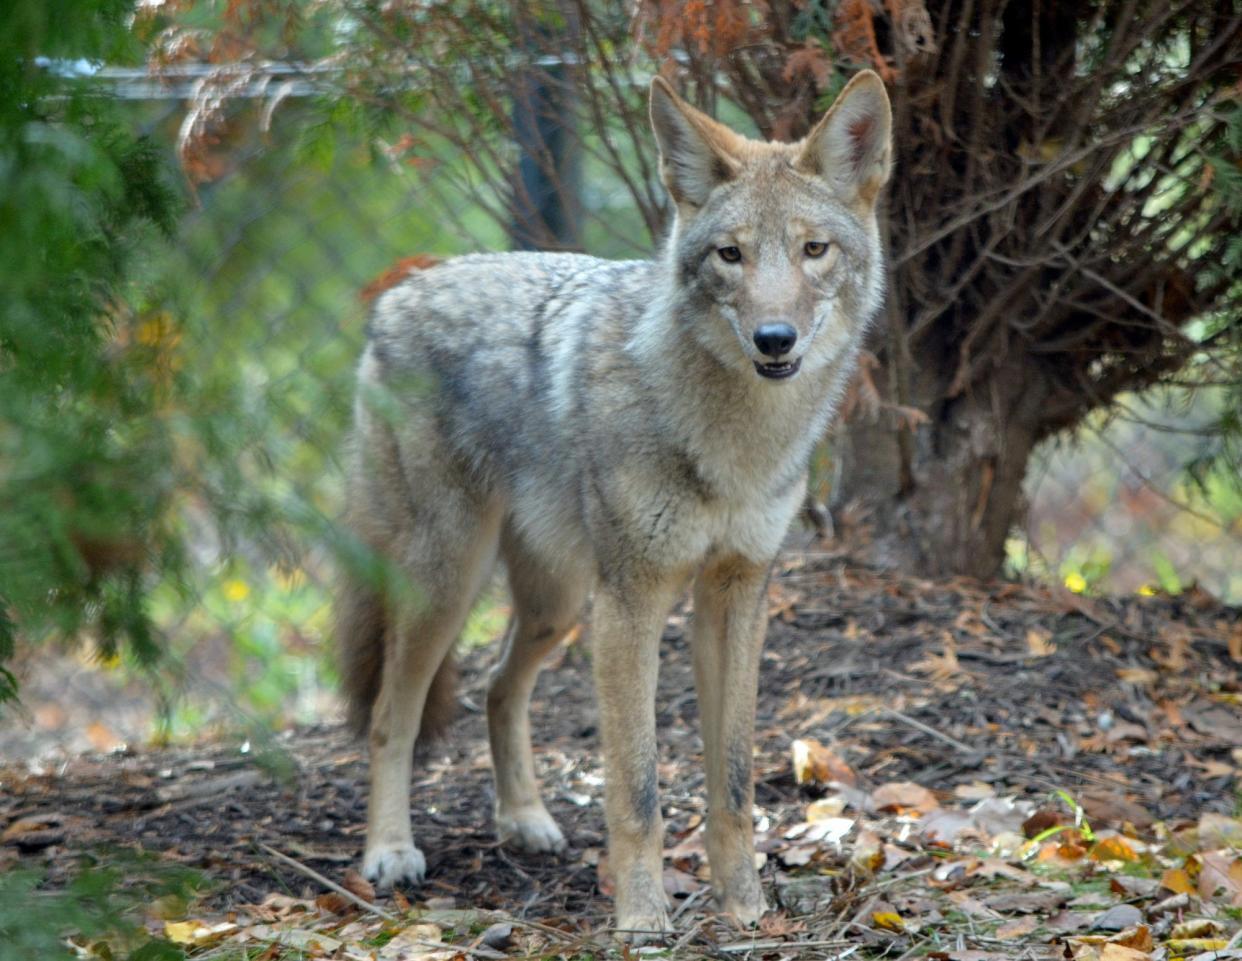 A male coyote Shilah (shy-luh) calls the Akron Zoo's Mike & Mary Stark Grizzly Ridge exhibit home.